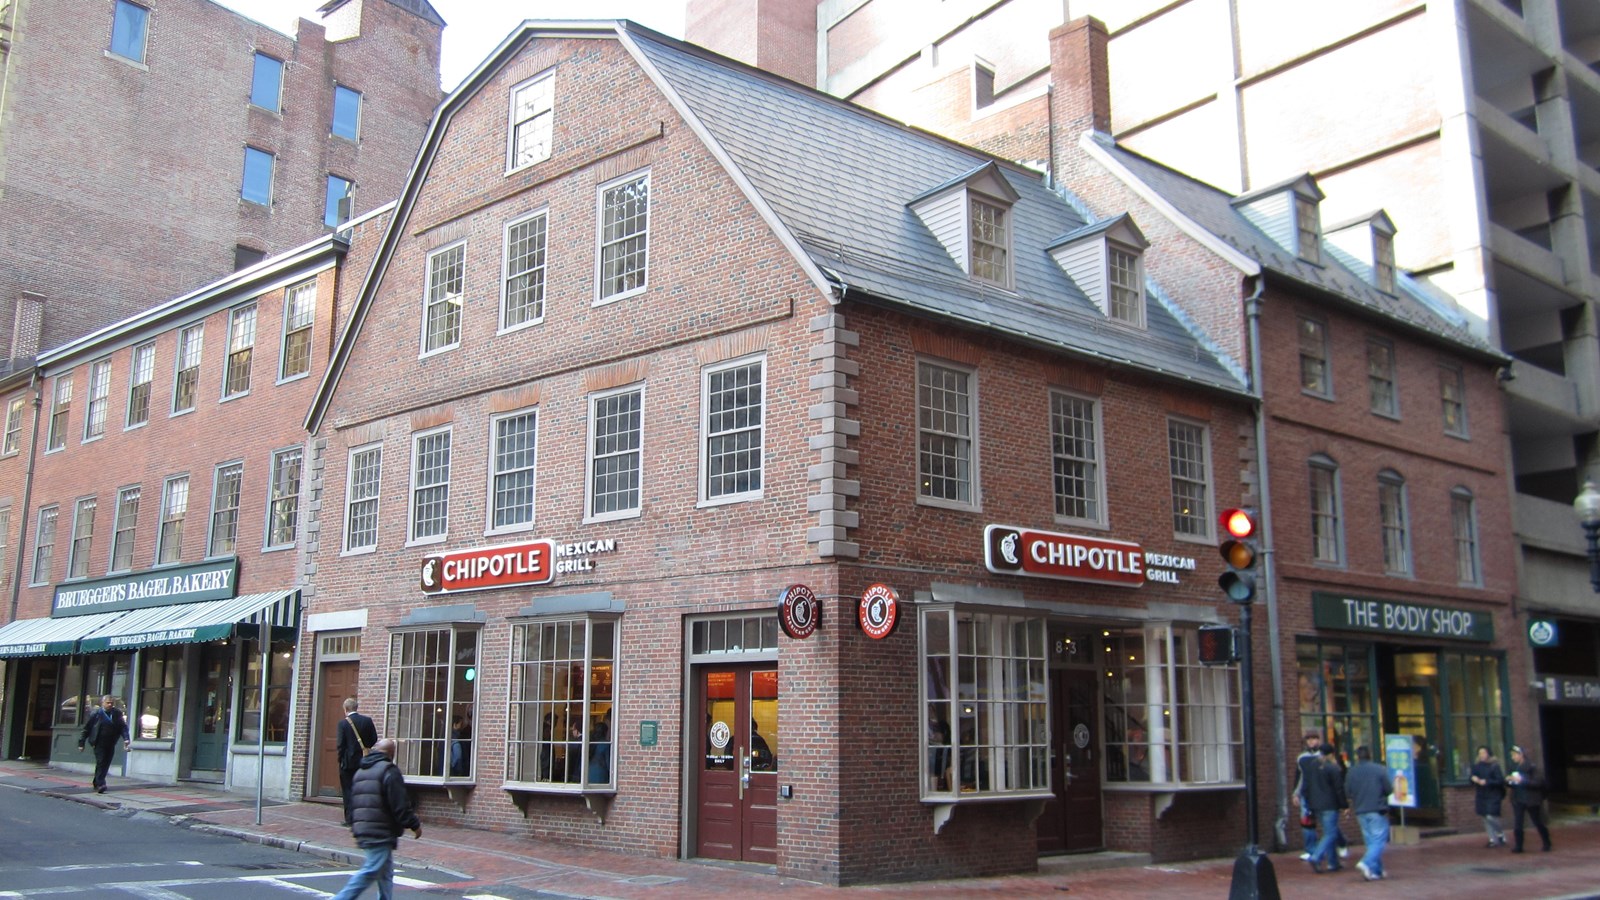 Photograph of a brick three story building under a gambrel roof. Signs read Chipotle